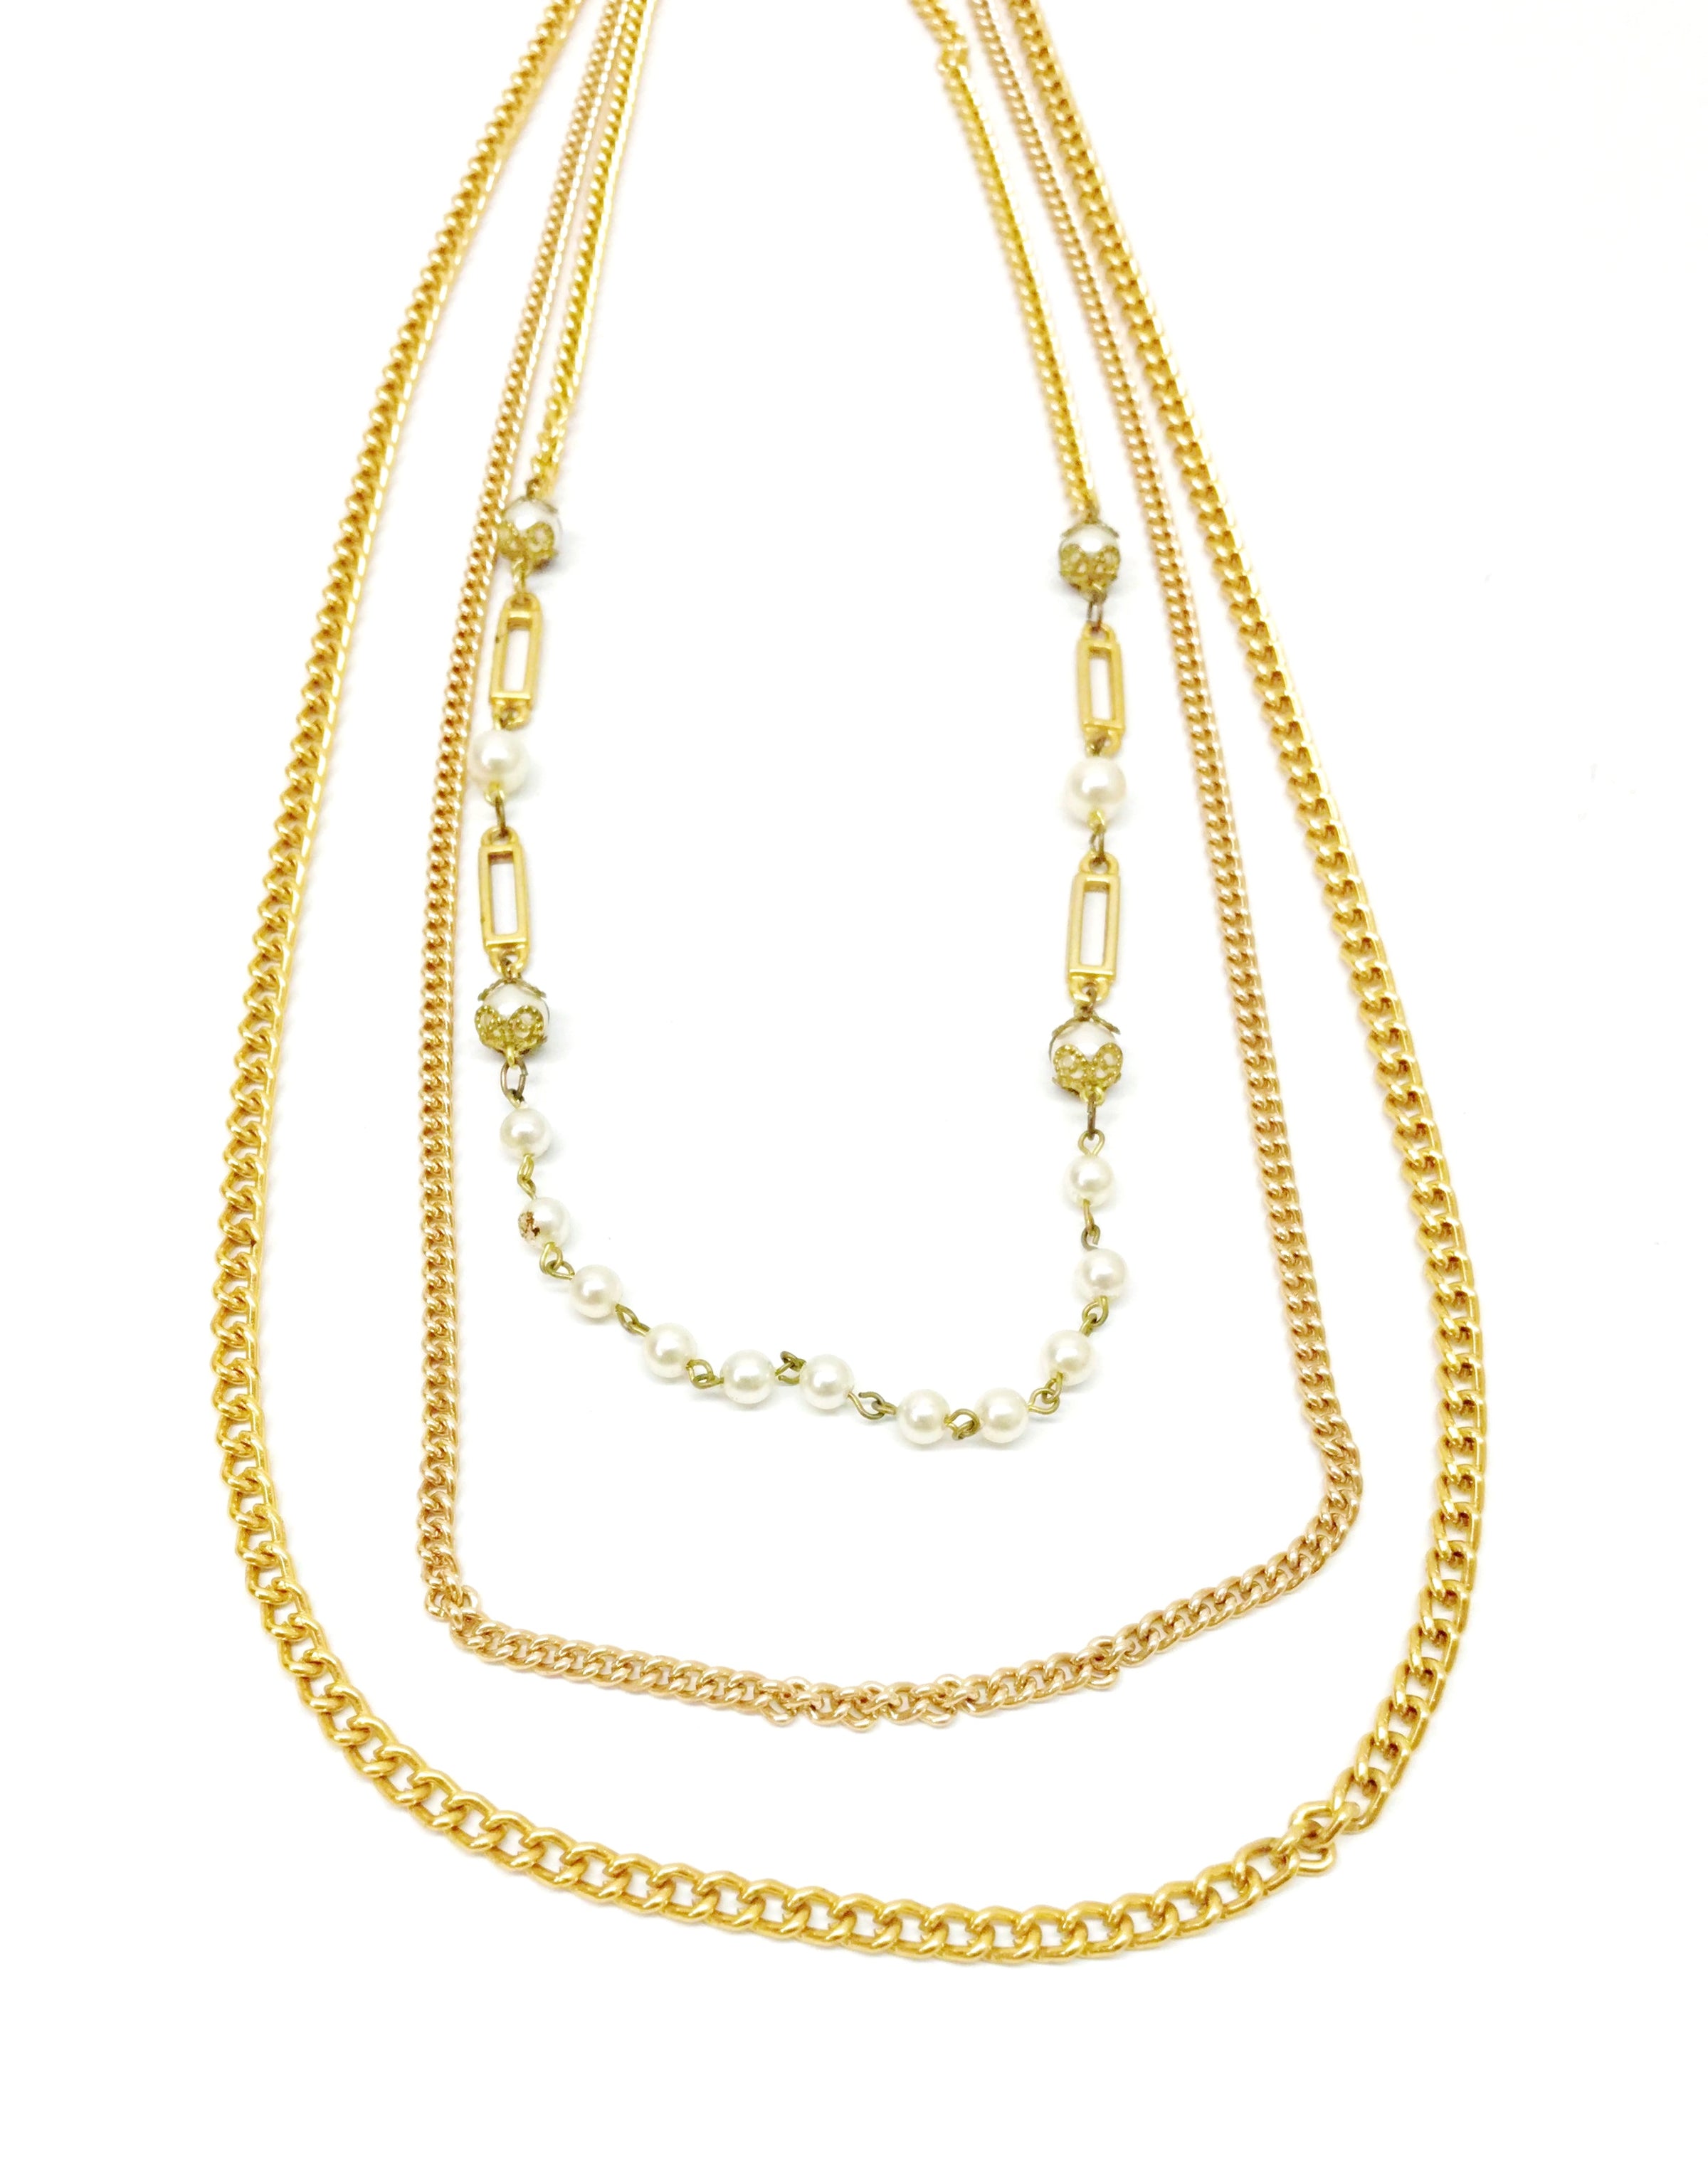 Vintage Faux Pearls and Gold Chain Triple Strand Necklace